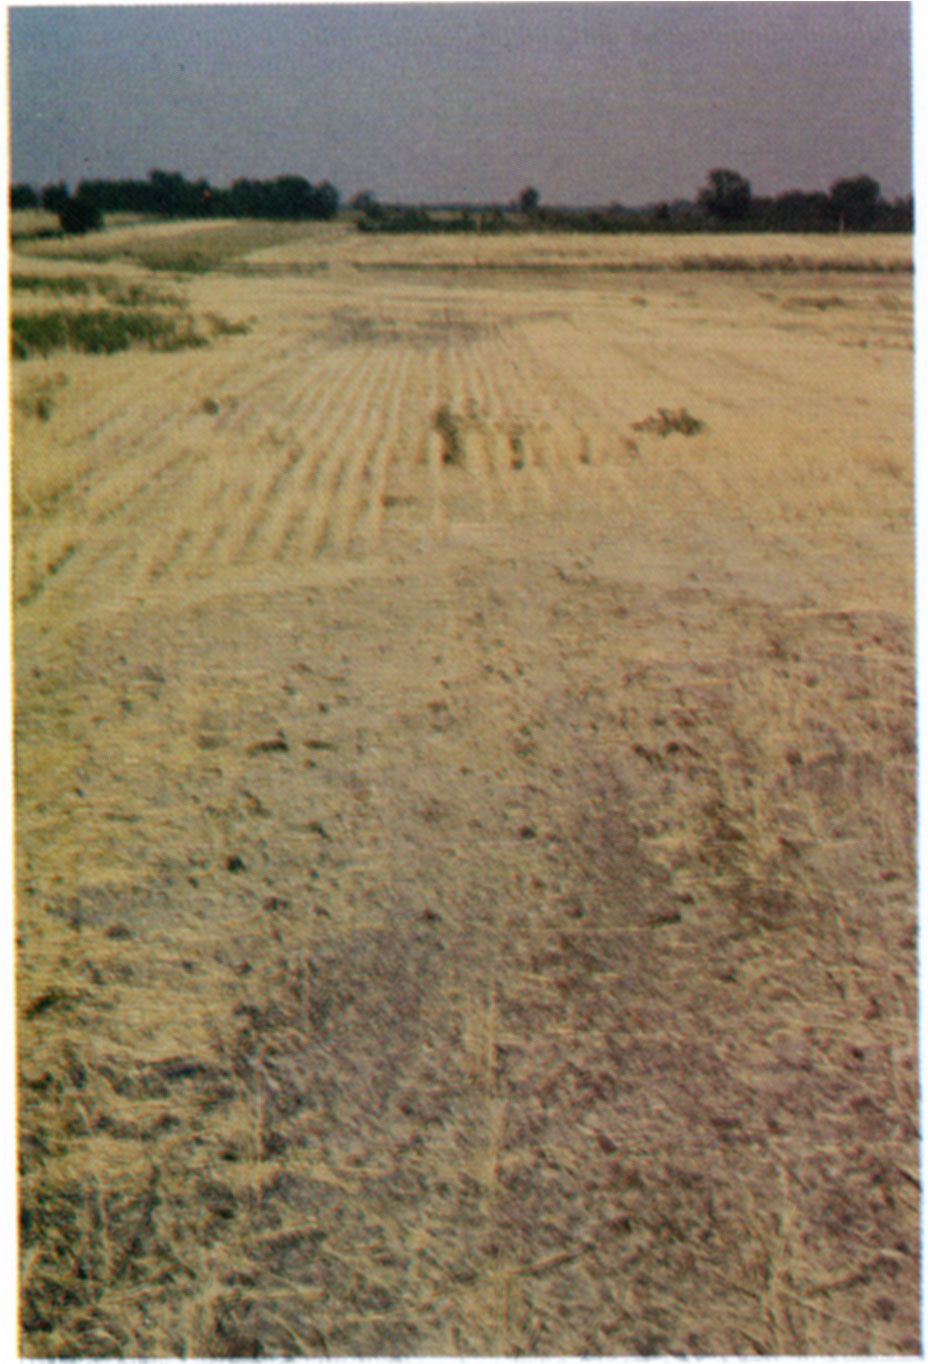 View of wheat stubble and an excessively acid spot (hotspot) in the northern half of Field 1, August 1975.